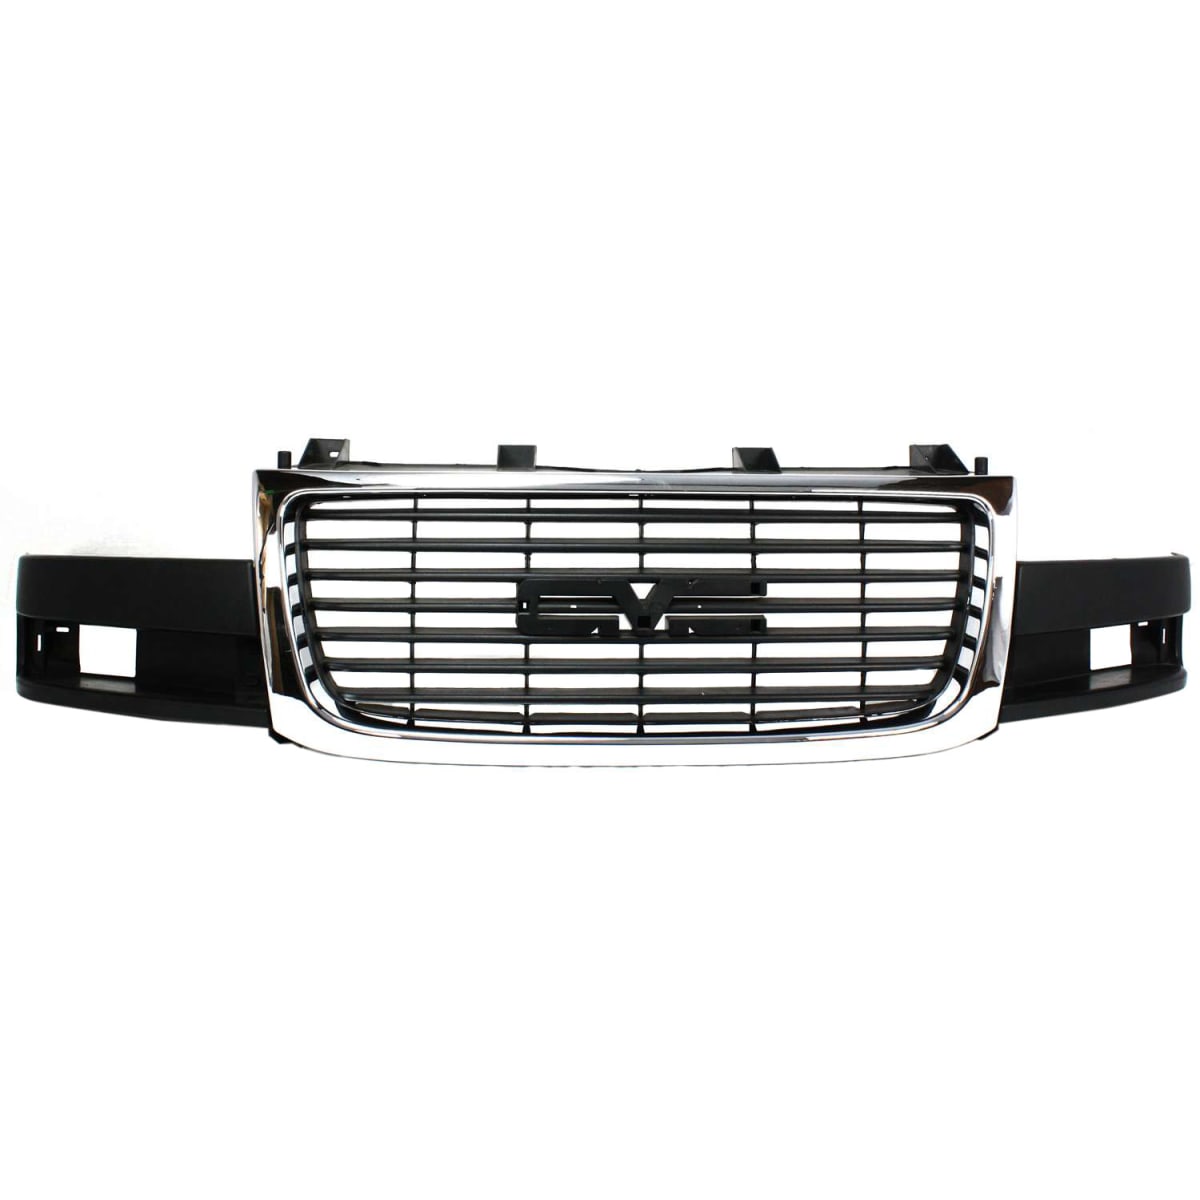 Grille Assembly for 2003-2014 GMC Savana 1500 OE Replacement G070116 -  Walmart.com